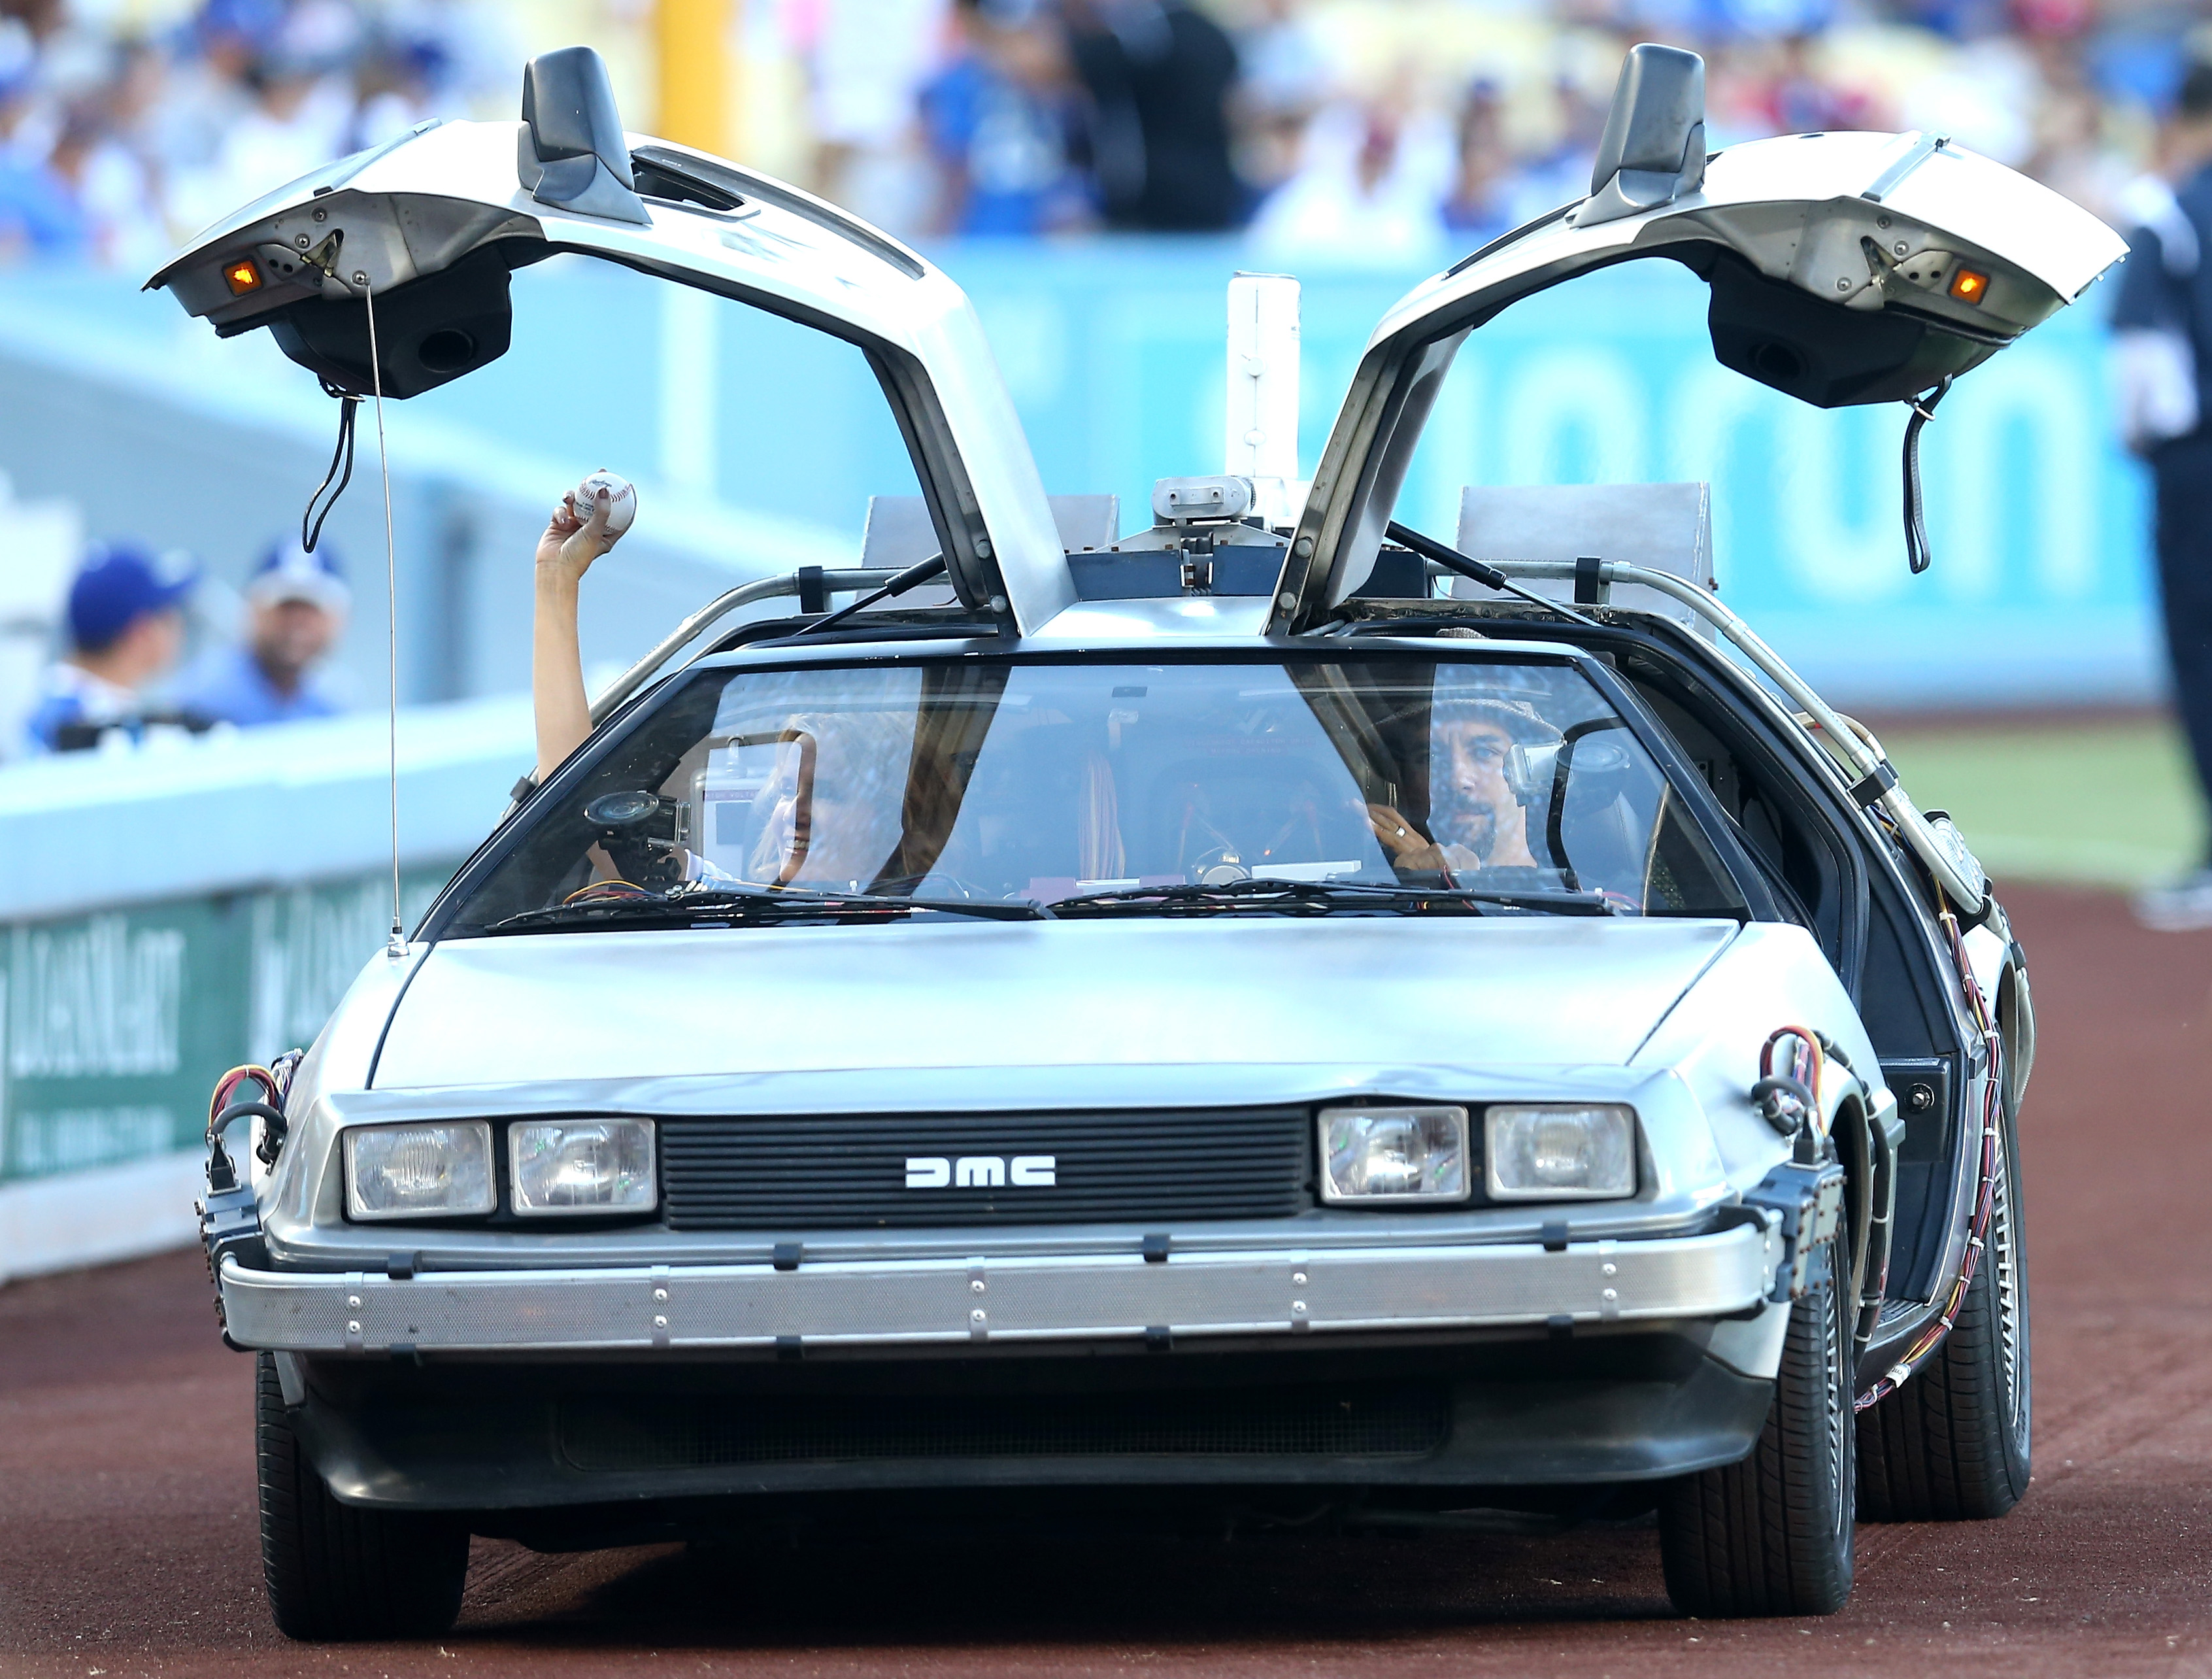 Actress Lea Thompson arrives in a DeLorean to throw out the first pitch before the game between the Cincinnati Reds and the Los Angeles Dodgers at Dodger Stadium on August 15, 2015 in Los Angeles, California, ahead of the after game showing of Back to Future on the stadium video boards. (Stephen Dunn&mdash;Getty Images)